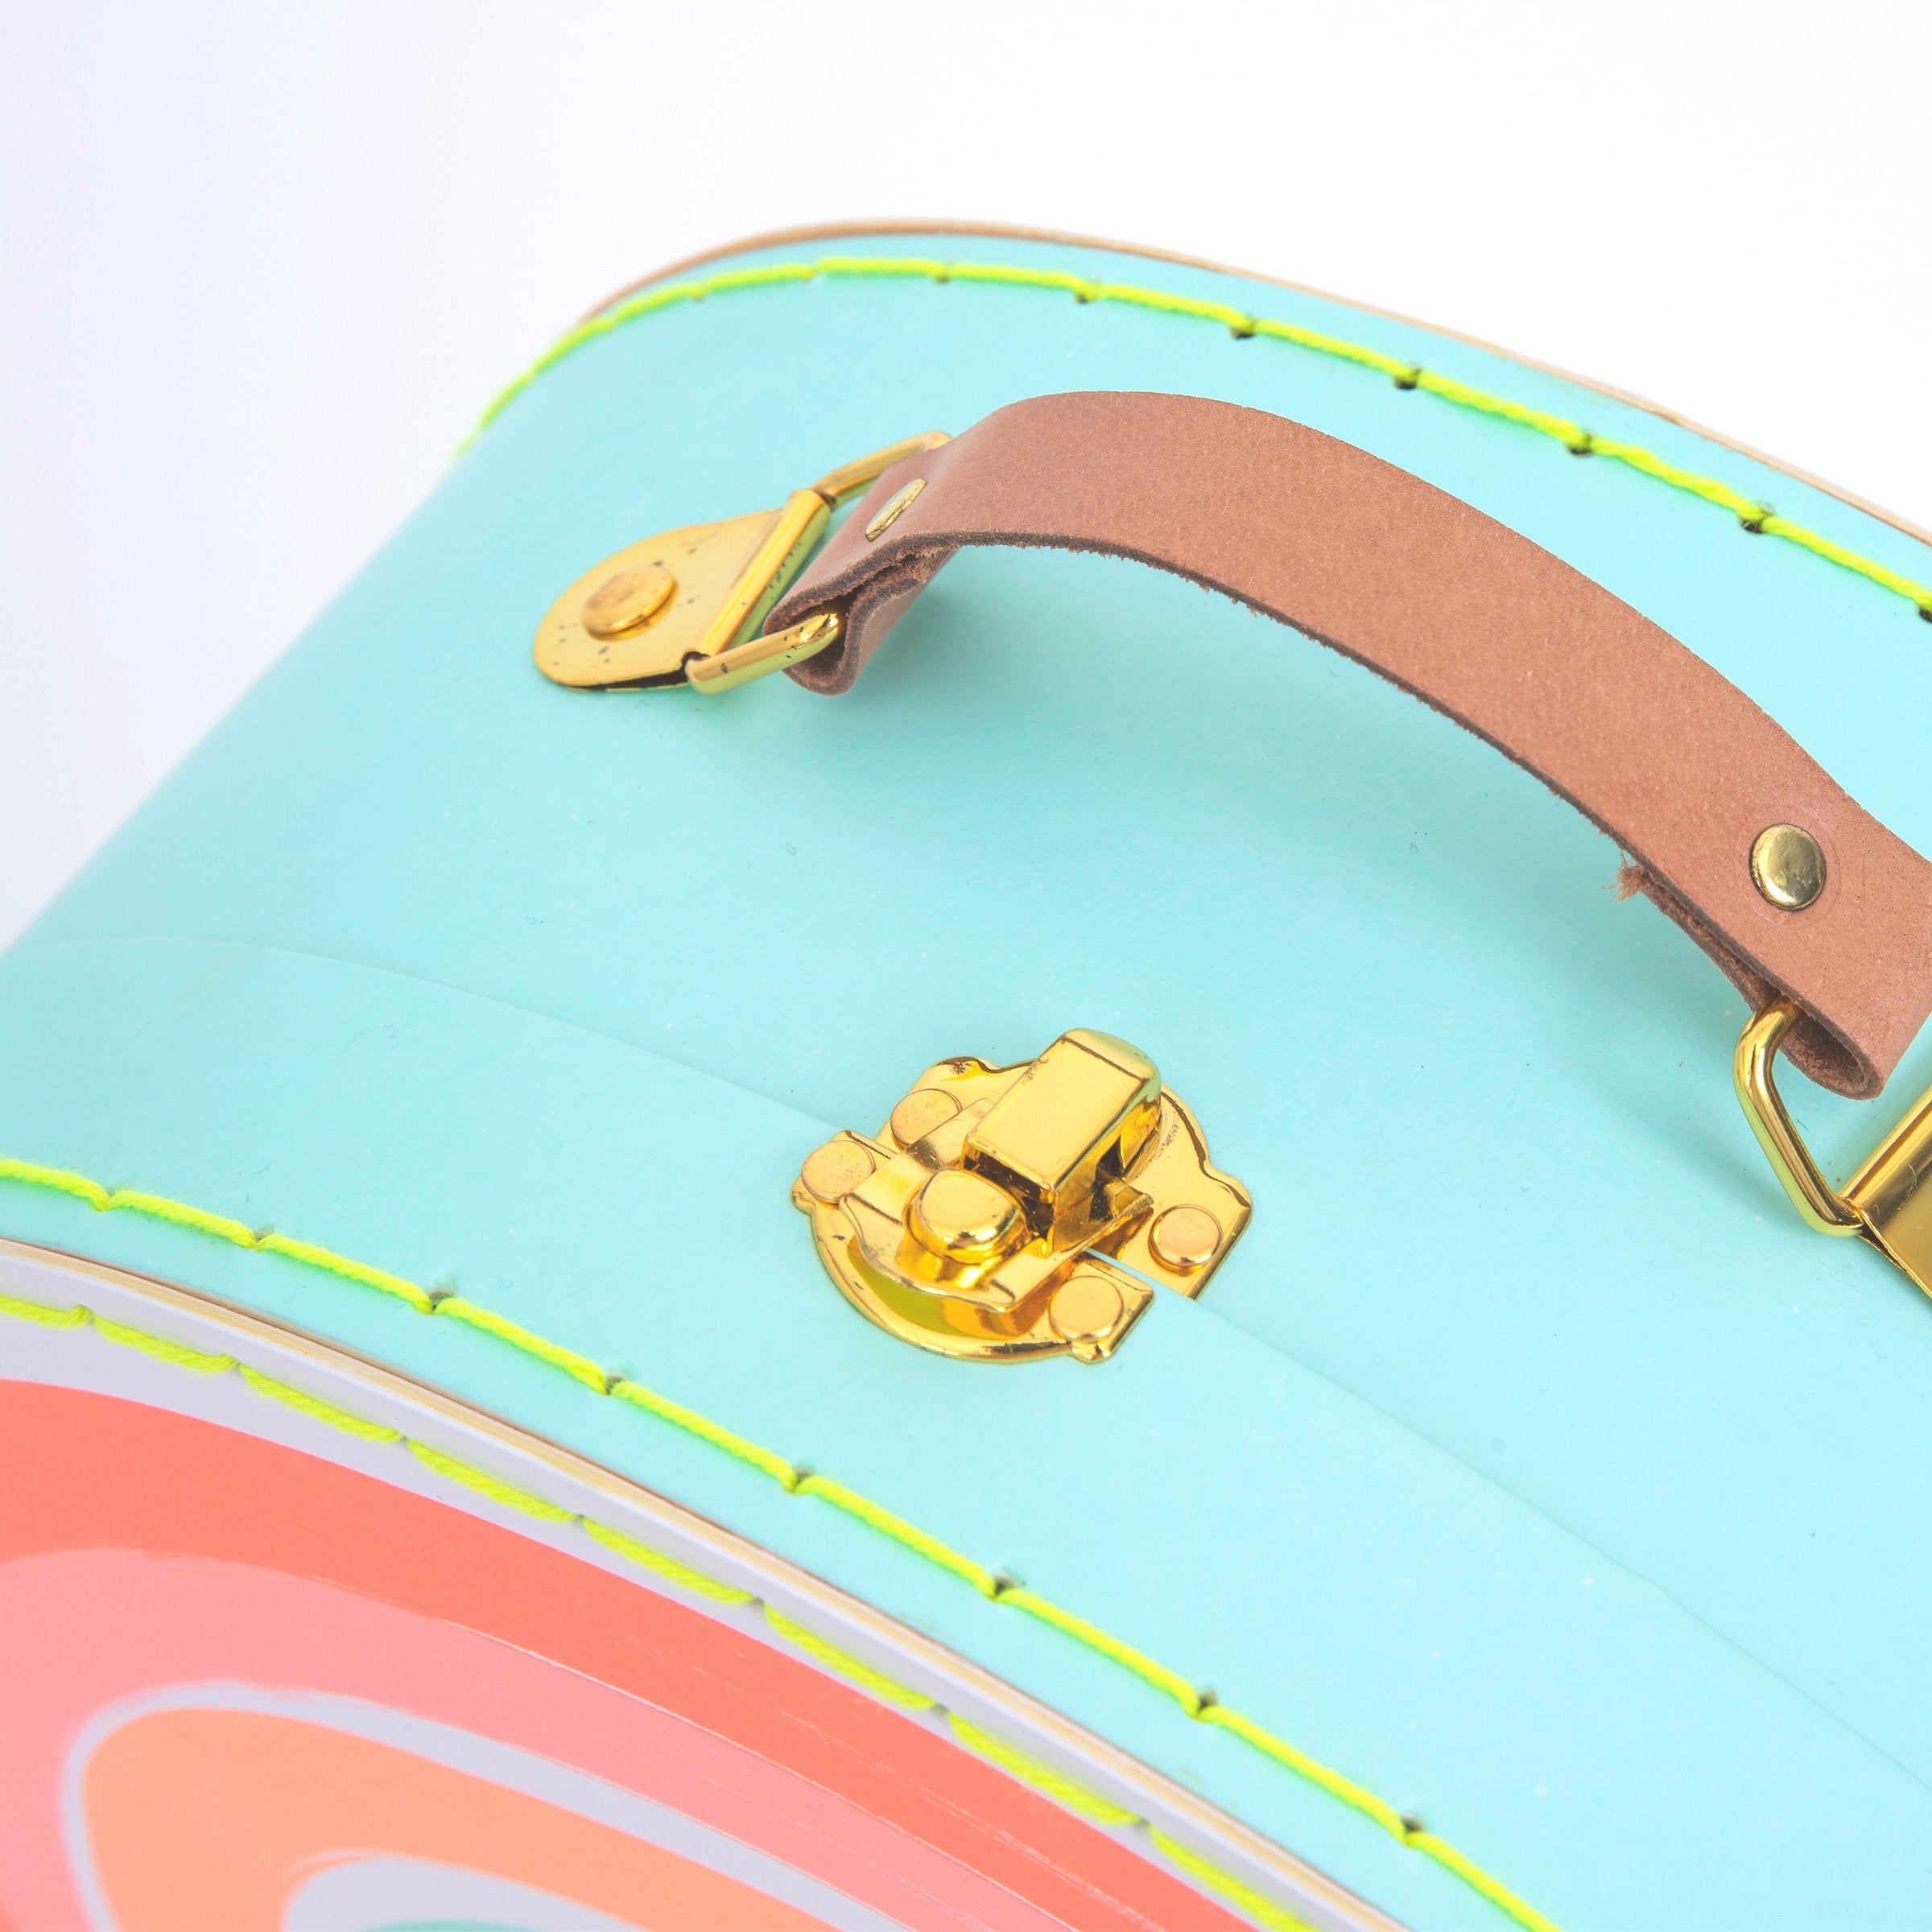 These kid's suitcases have a rainbow decoration and natural leather handles.